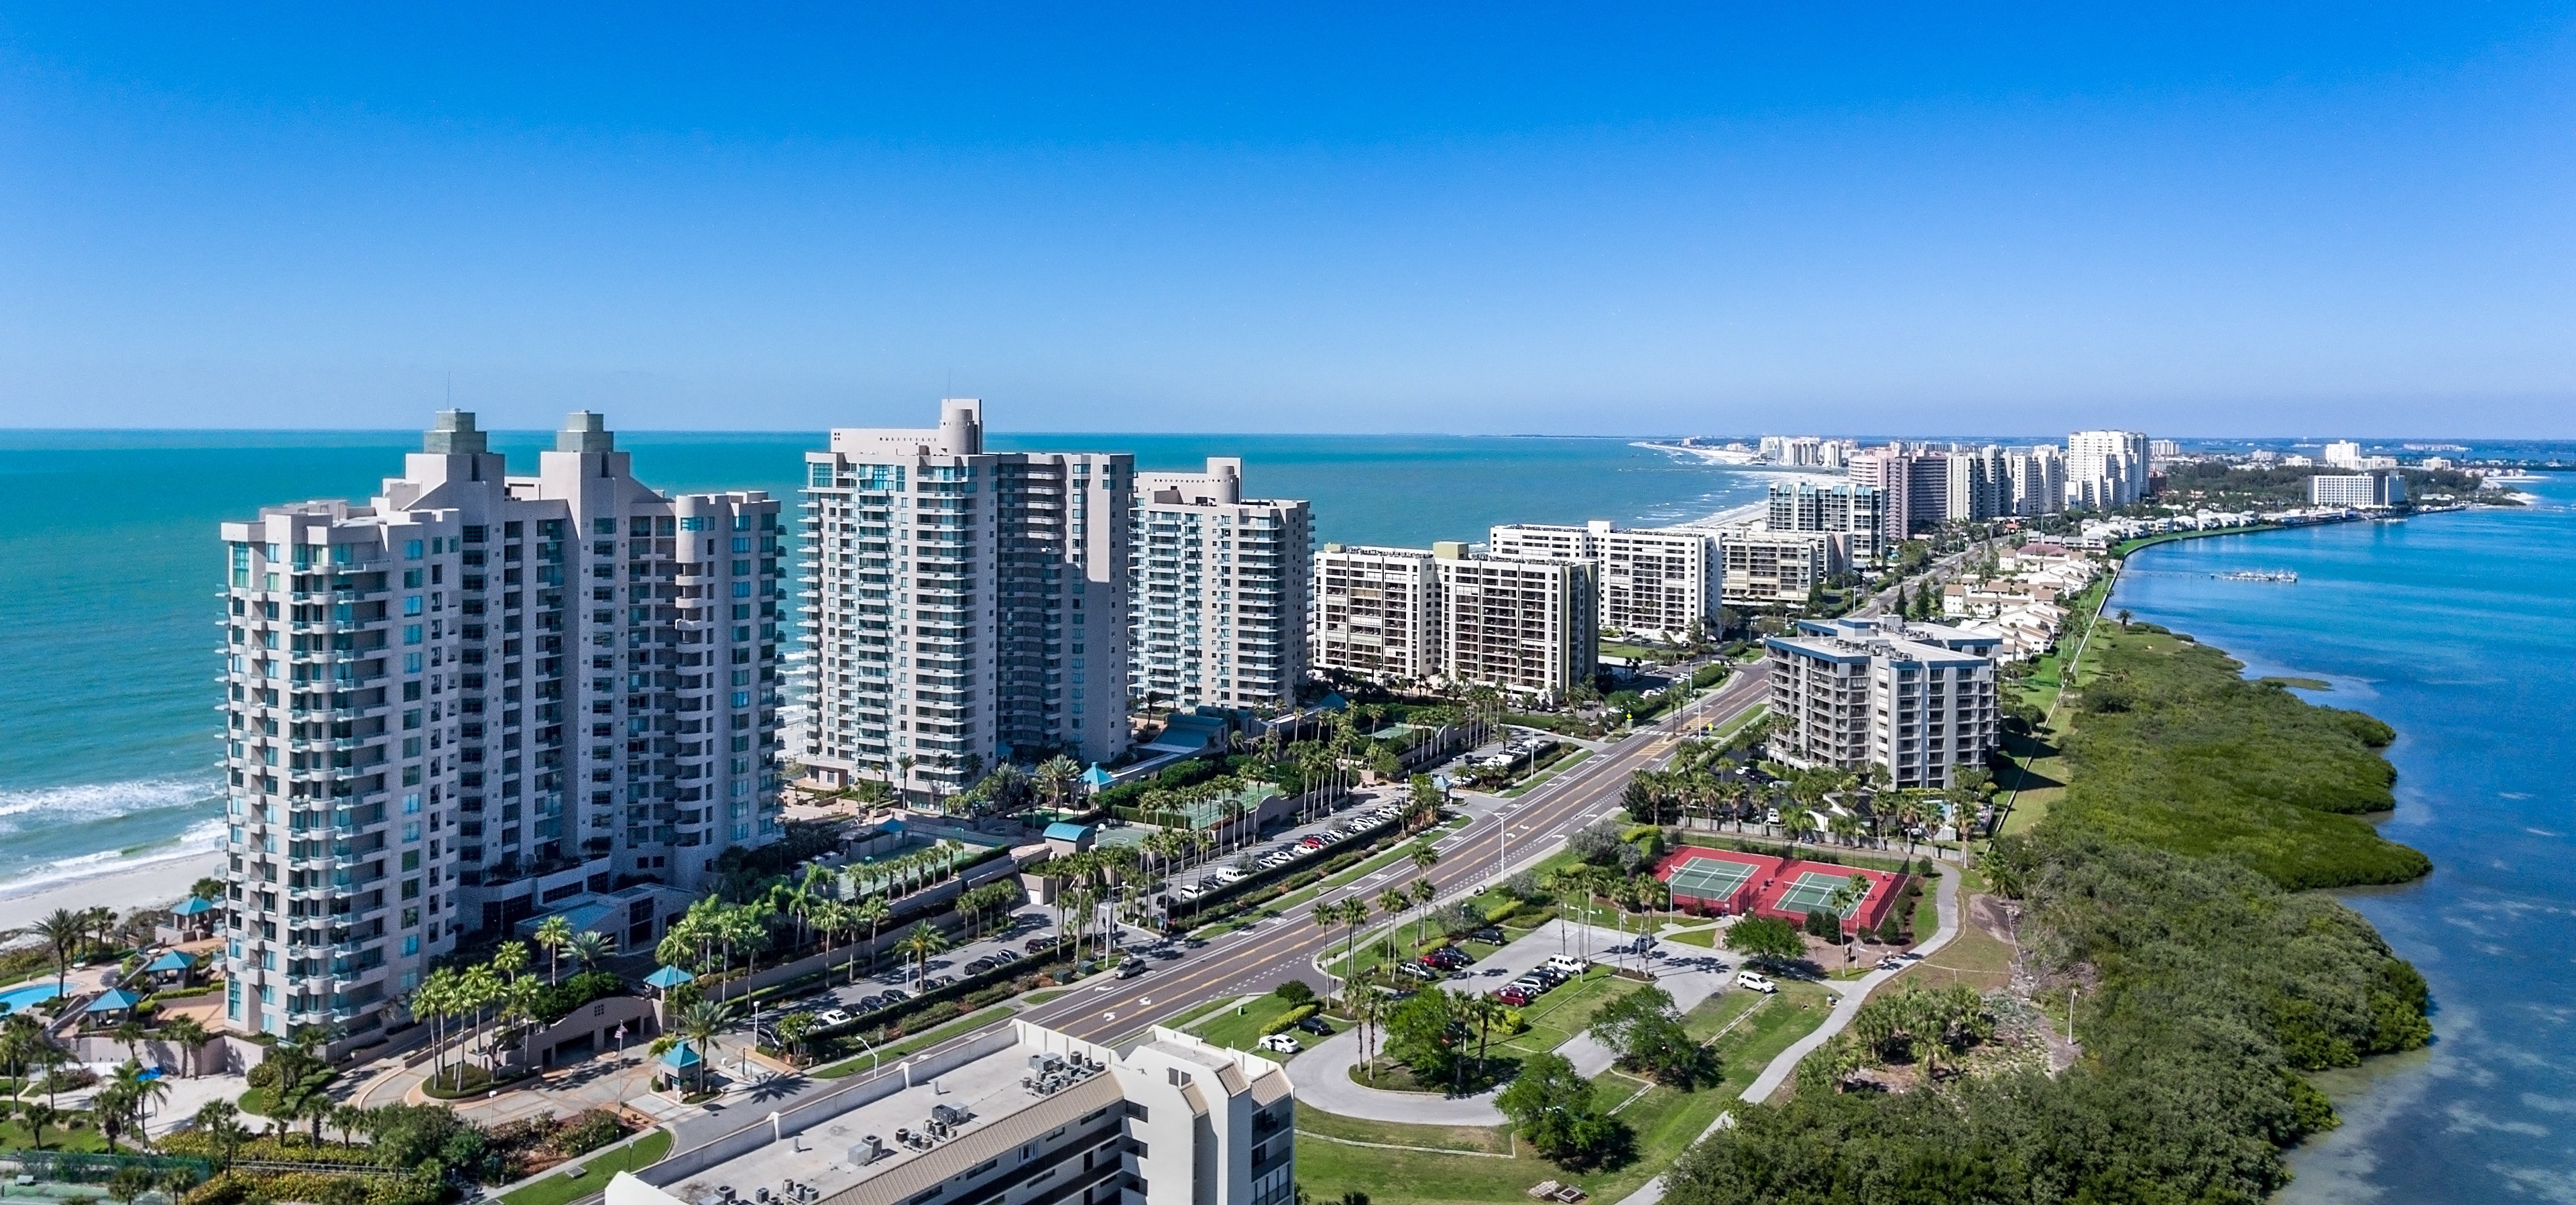 The skyline of Clearwater Beach, Florida. A US judge has denied a request for a preliminary injunction against a new law that sharply restricts the ability of Chinese citizens to buy property in the state. Photo: Shutterstock